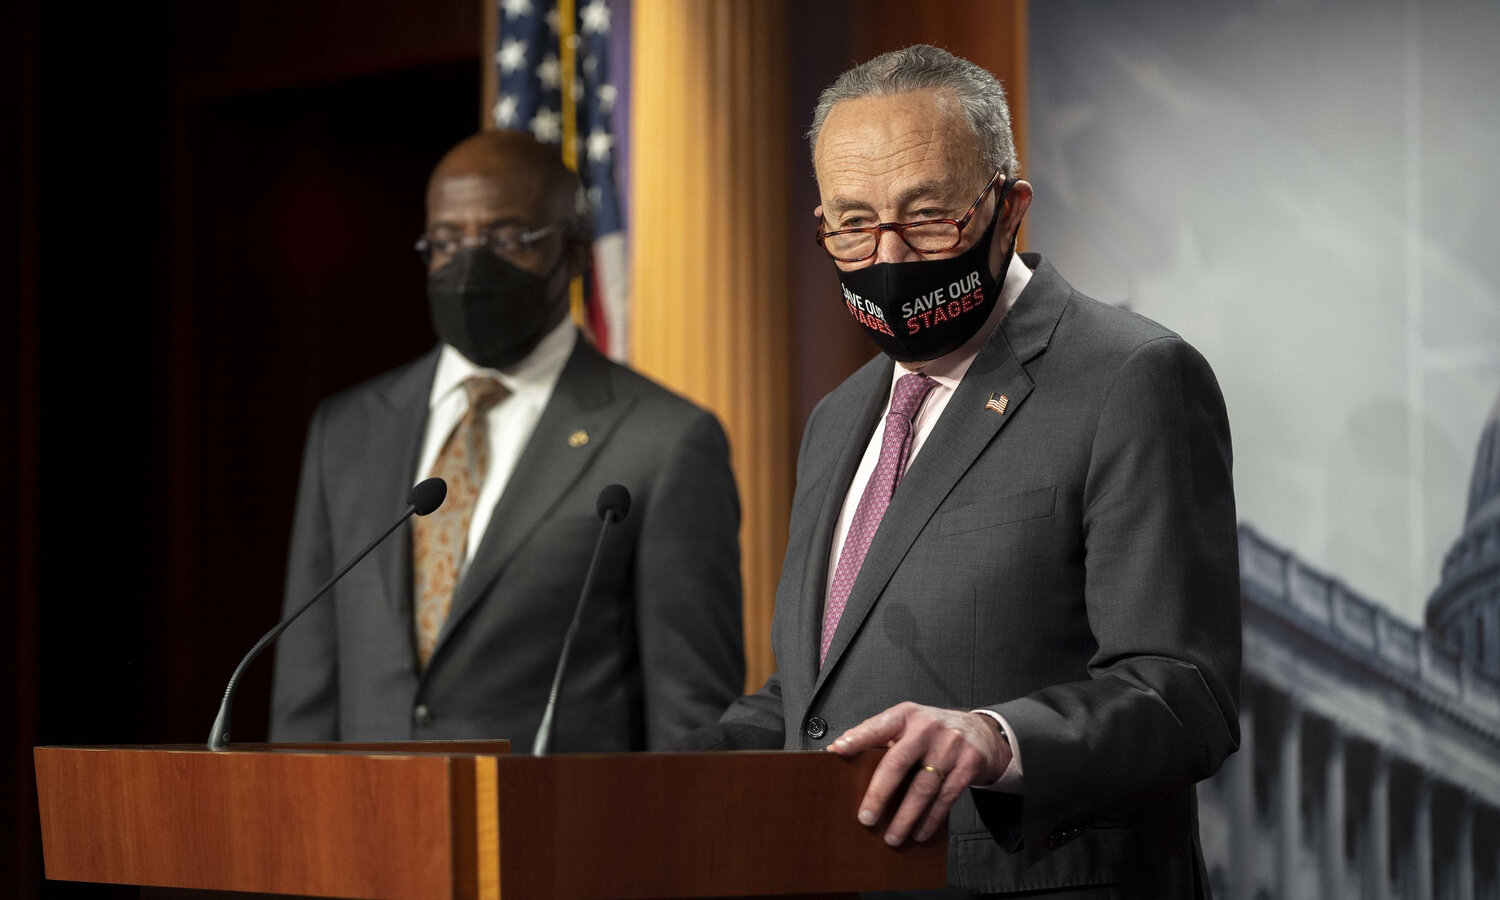 Senate Majority Leader Chuck Schumer (D-NY) and Senator Reverend Raphael Warnock (D-GA) during a press conference outlining COVID relief efforts on February 11th. Source: Flickr&nbsp;